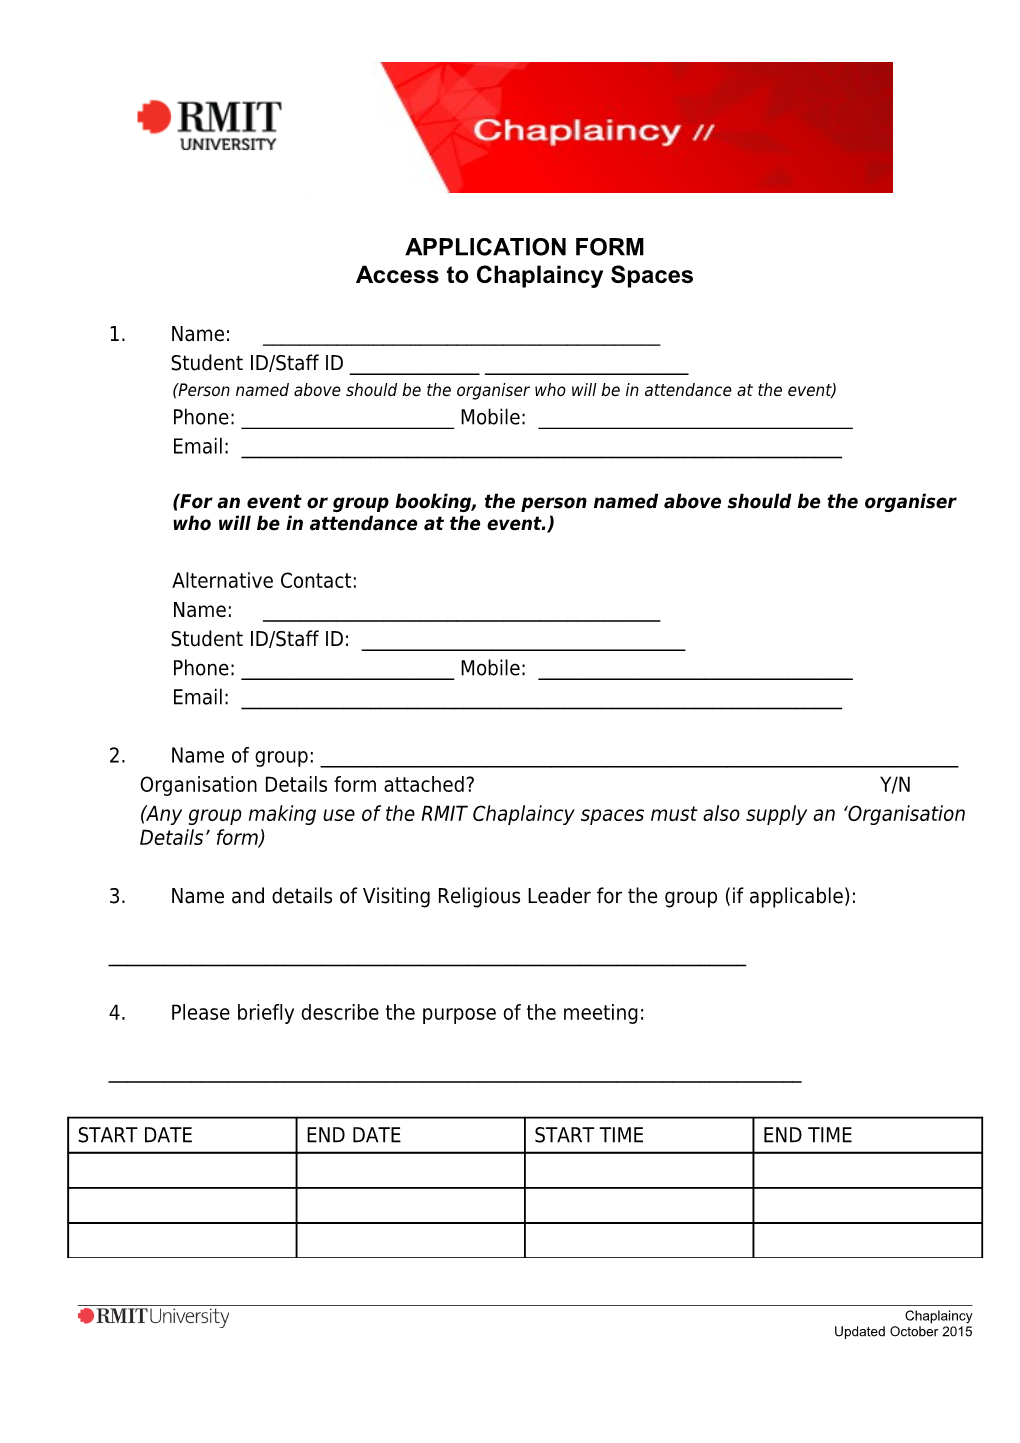 Application for Use of the Chaplaincy Spaces